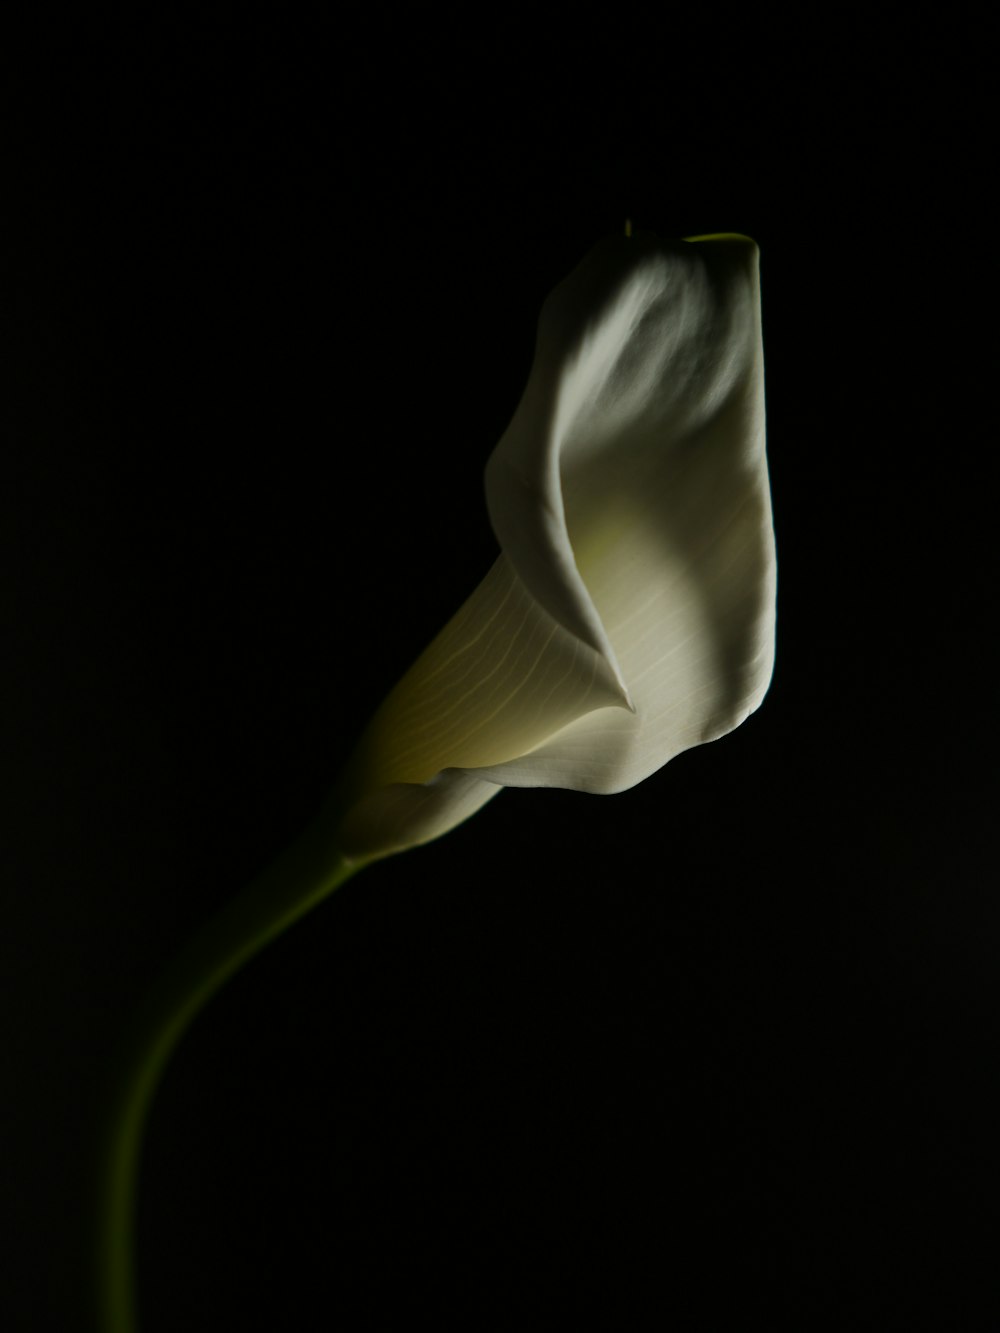 a white flower with a black background